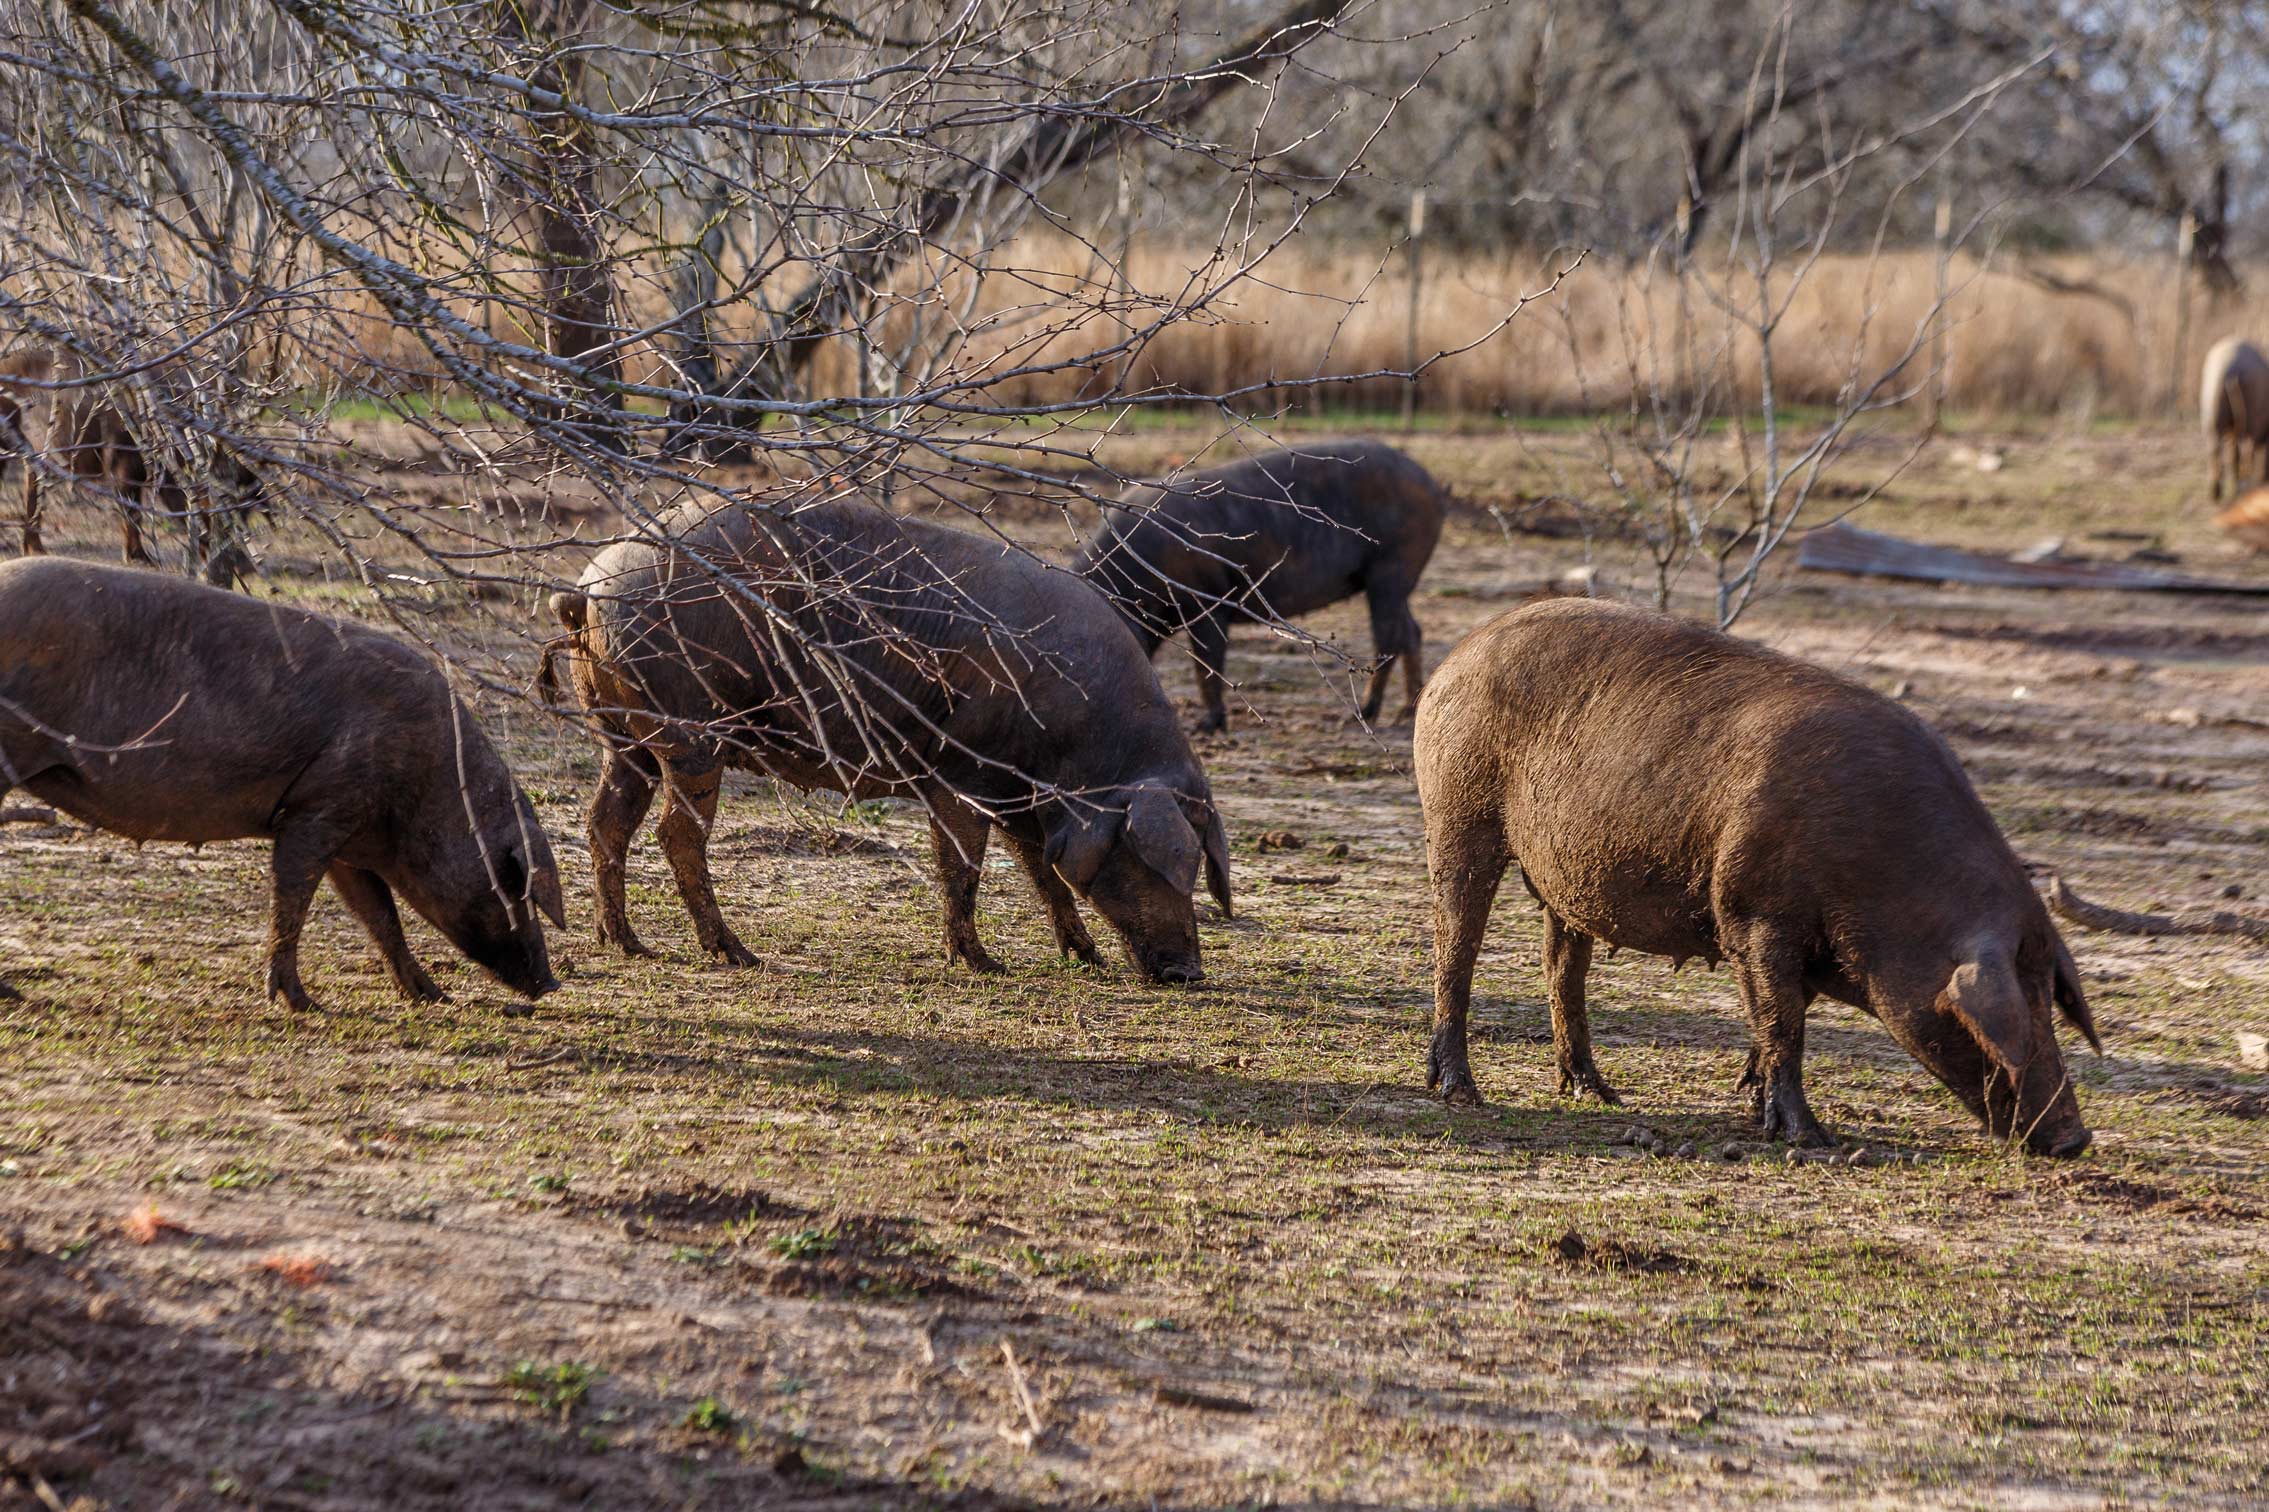 Pigs on the Flatonia ranch